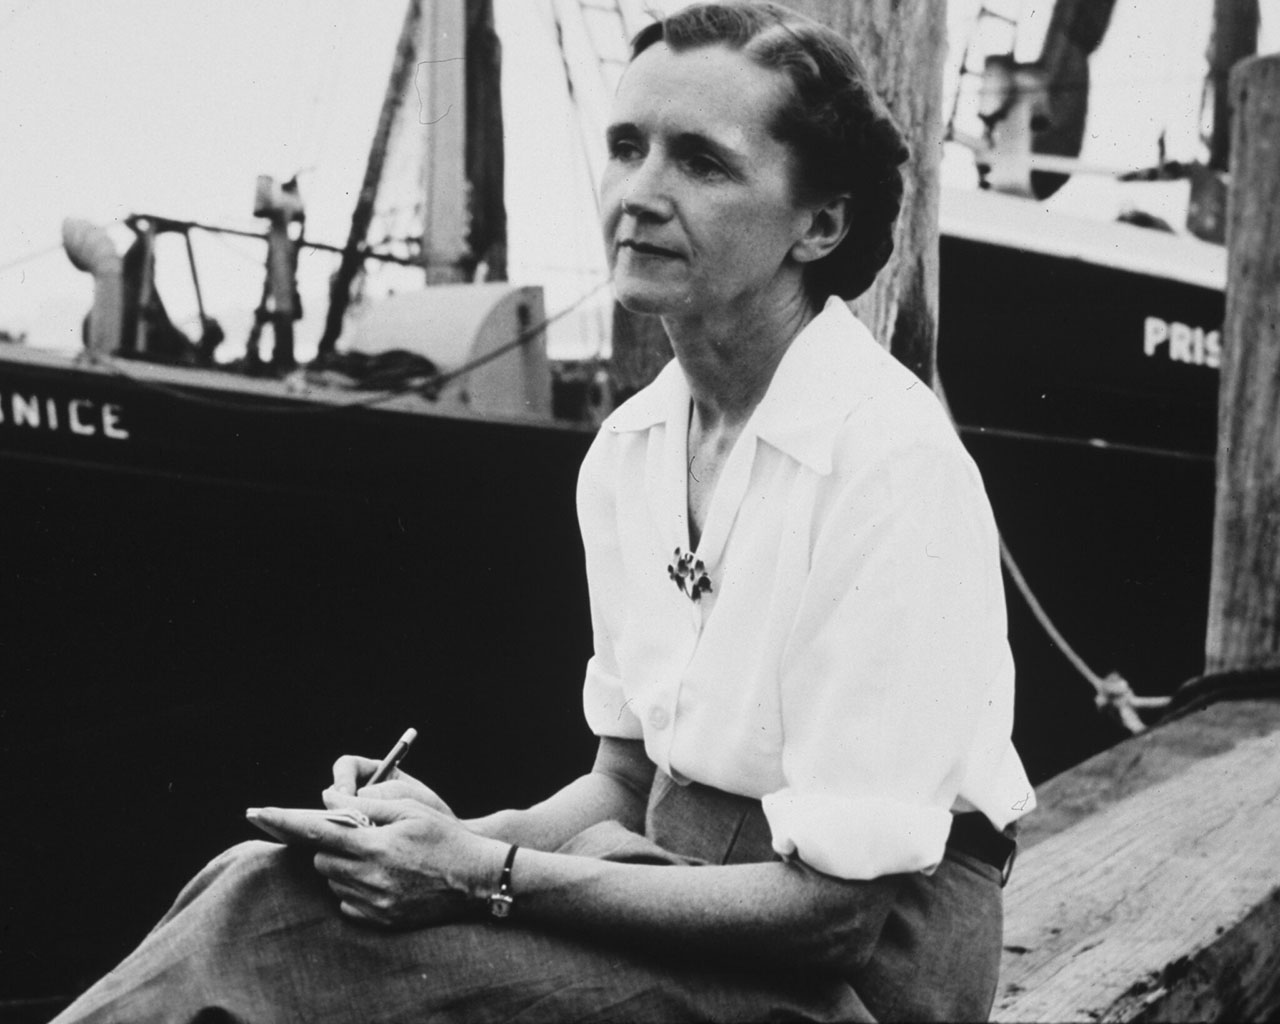 11 Profound Rachel Carson Quotes From Silent Spring And Her Other Books